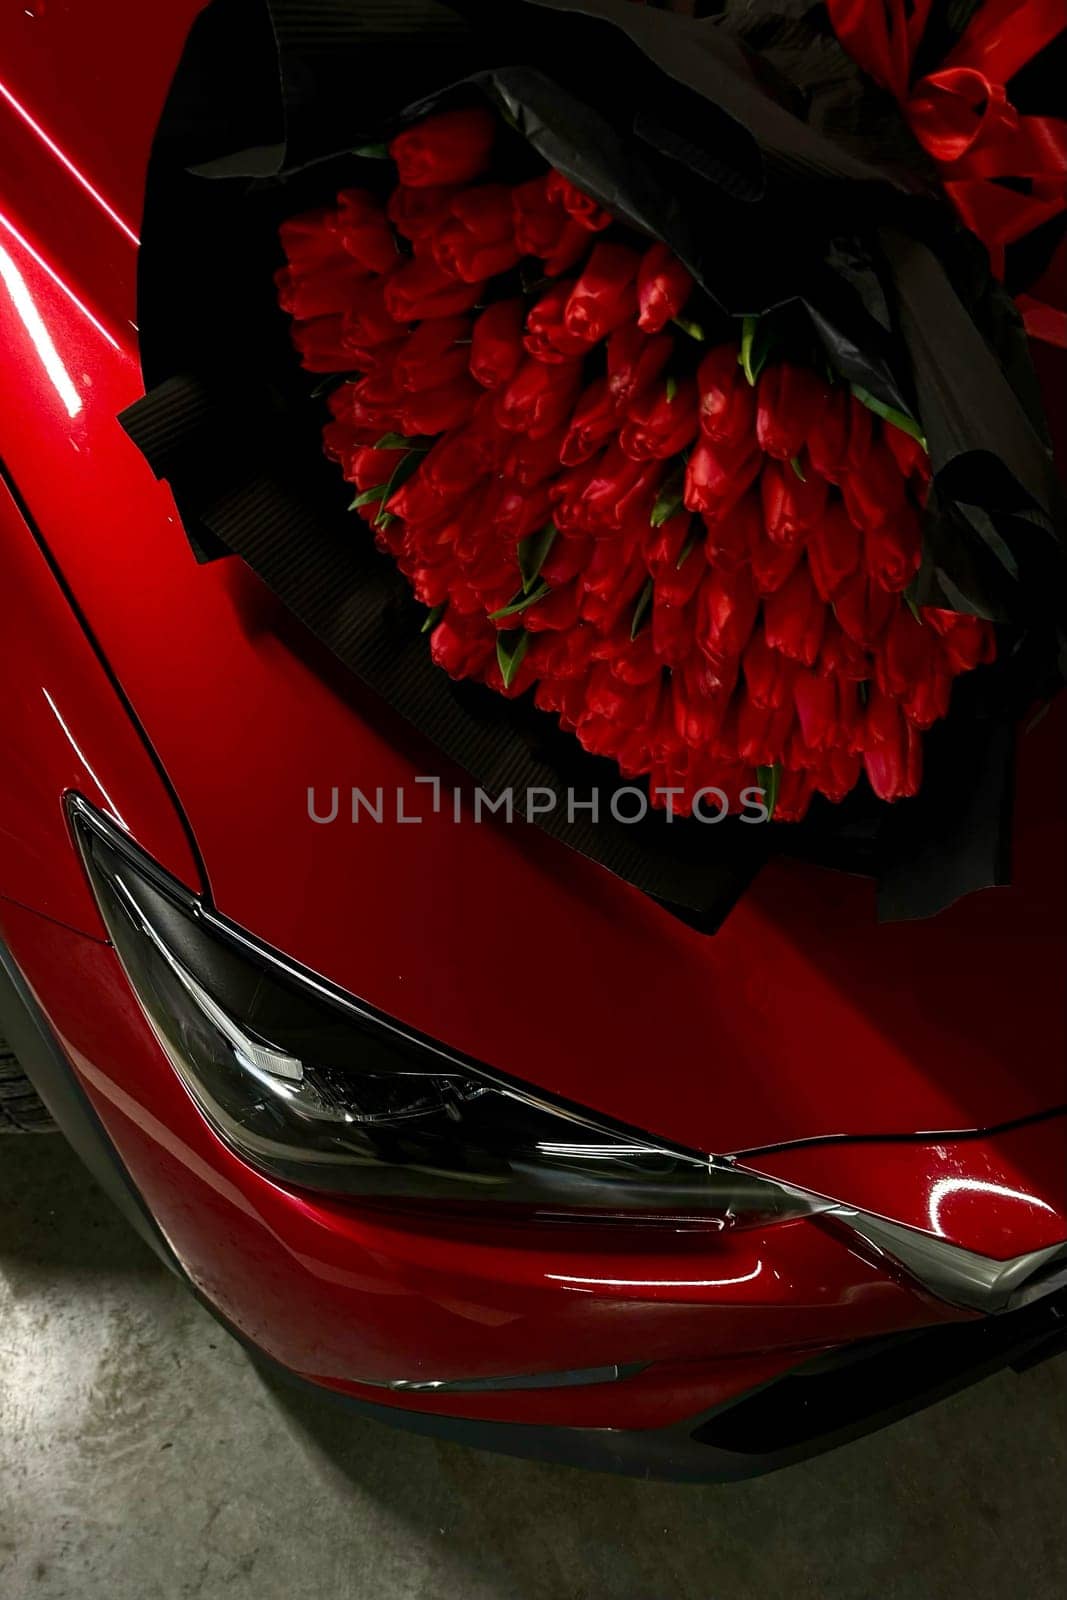 A large bouquet of bright red tulips on a red car by MilaLazo